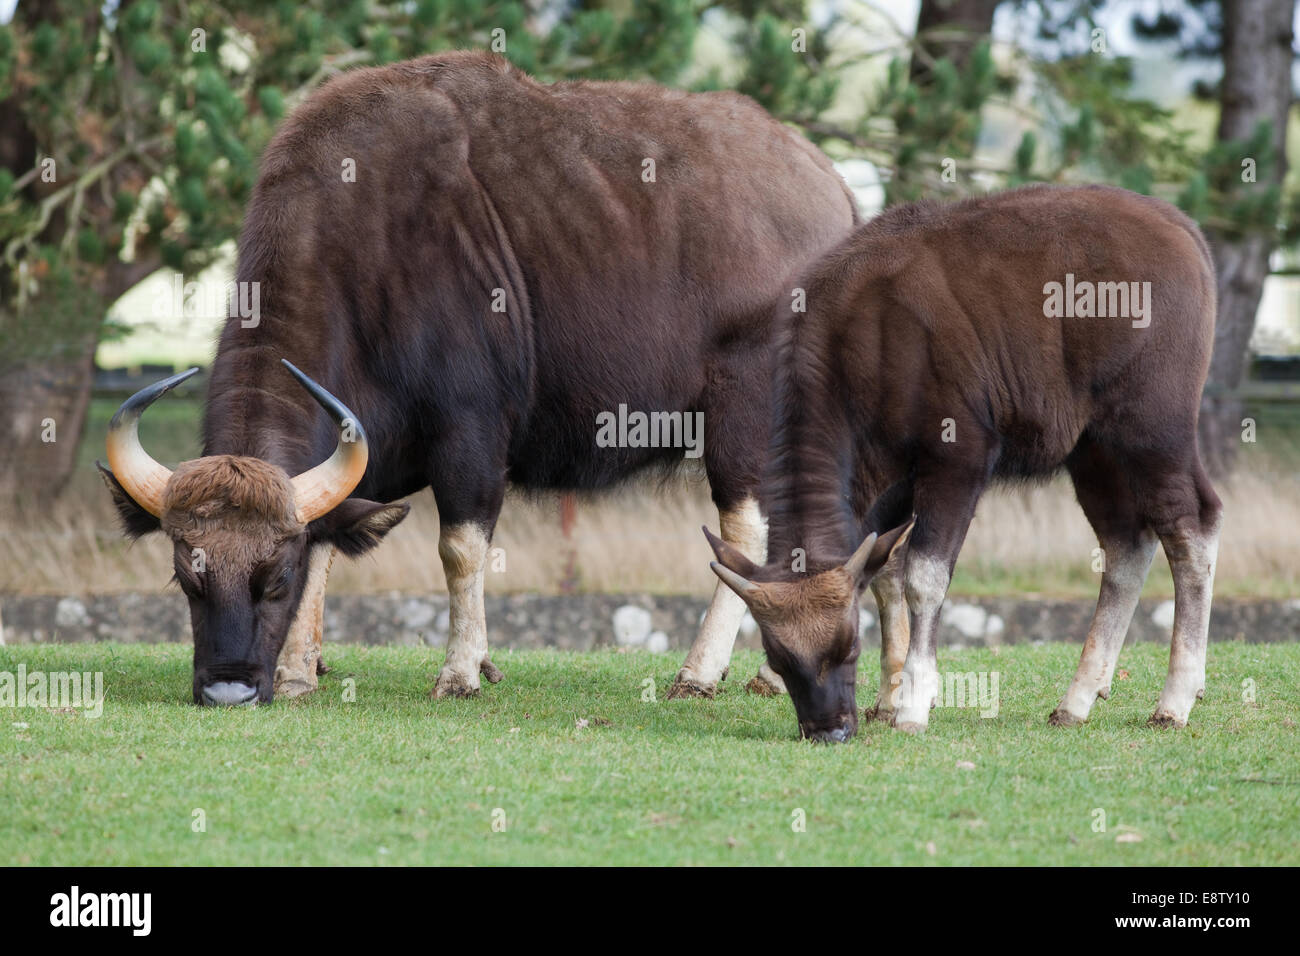 Gaur or Indian Bison, (Bos gaurus). Largest of all wild cattle. Native to south and southwest Asia. Here in Whipsnade Zoo (ZSL), Stock Photo